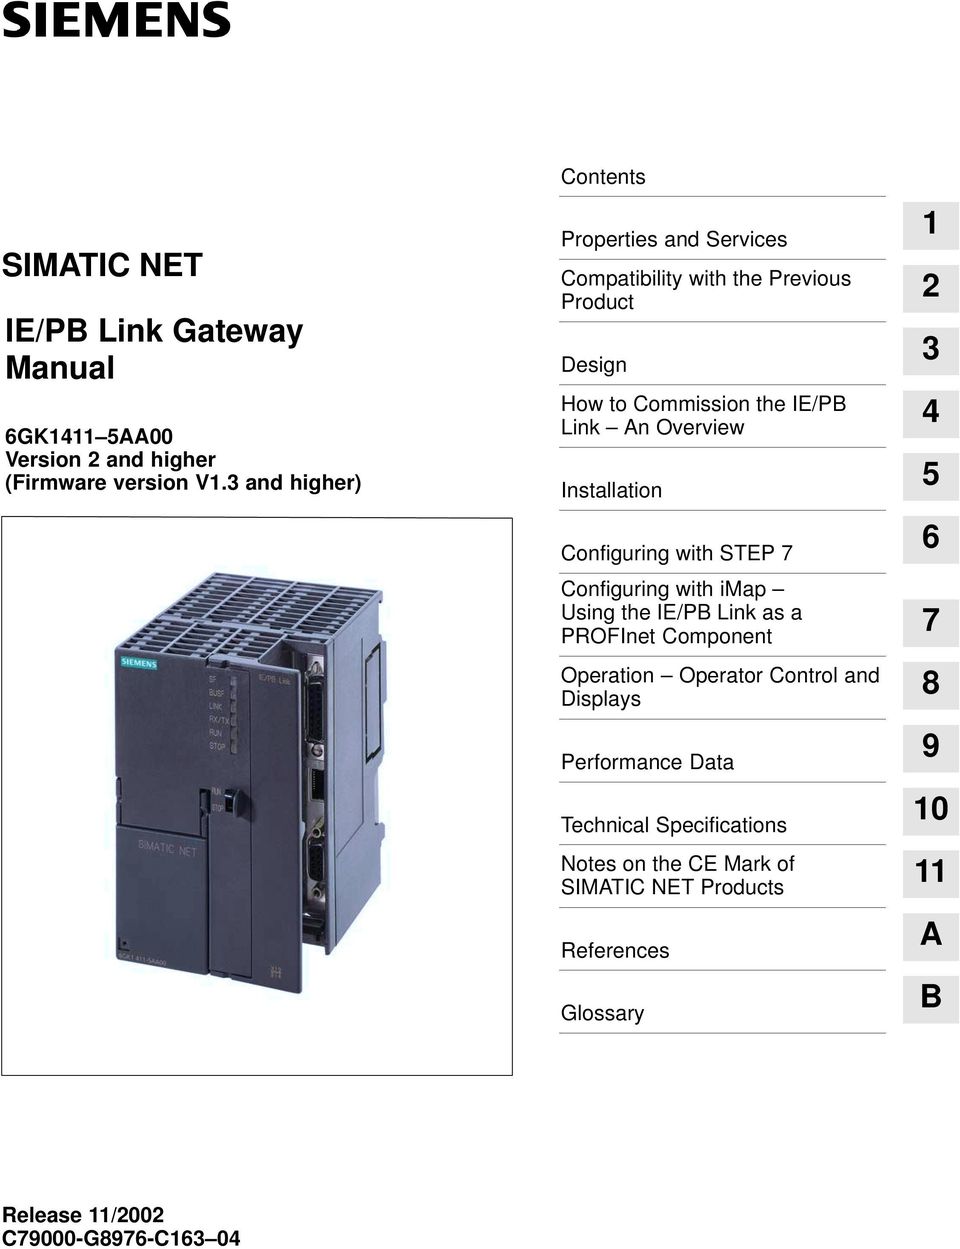 Link An Overview Installation 5 Configuring with STEP 7 6 Configuring with imap Using the IE/PB Link as a PROFInet Component 7